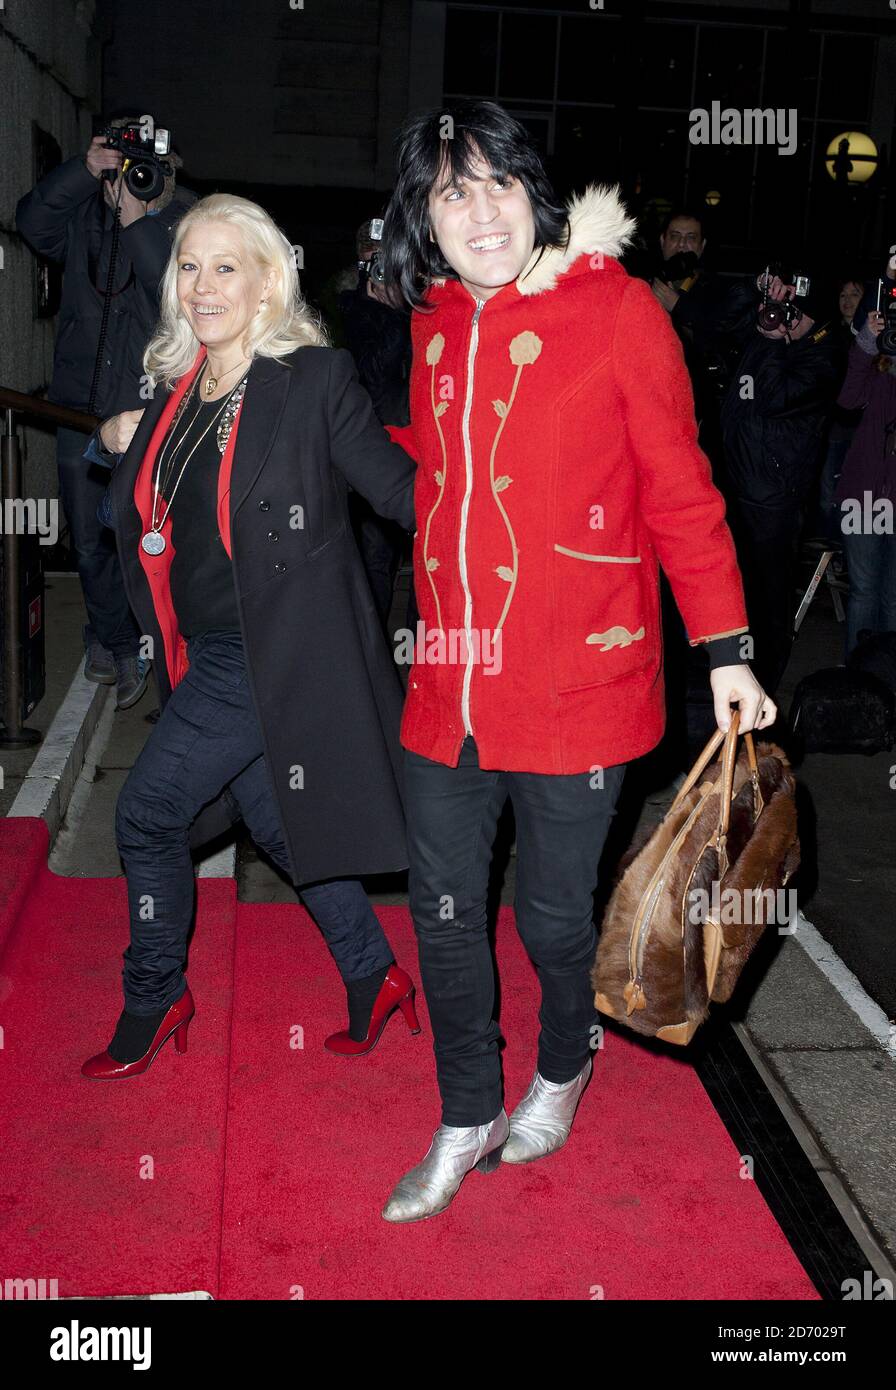 Noel Fielding arriving at the Evening Standard British Film Awards 2012, at the London Film Museum. Stock Photo